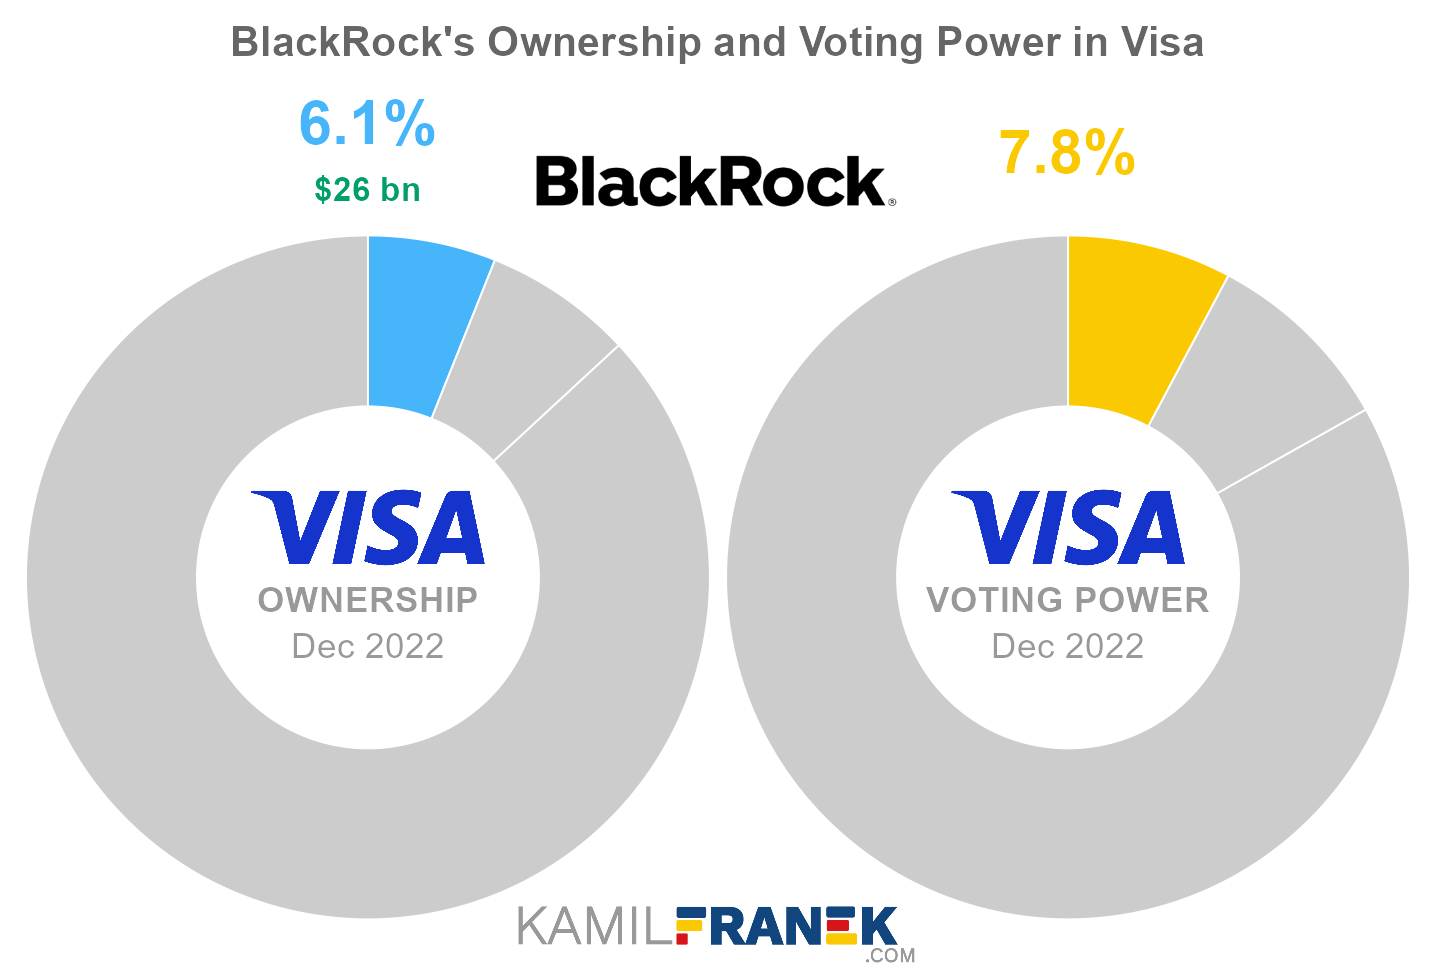 BlackRock's share ownership and voting power in Visa (chart)